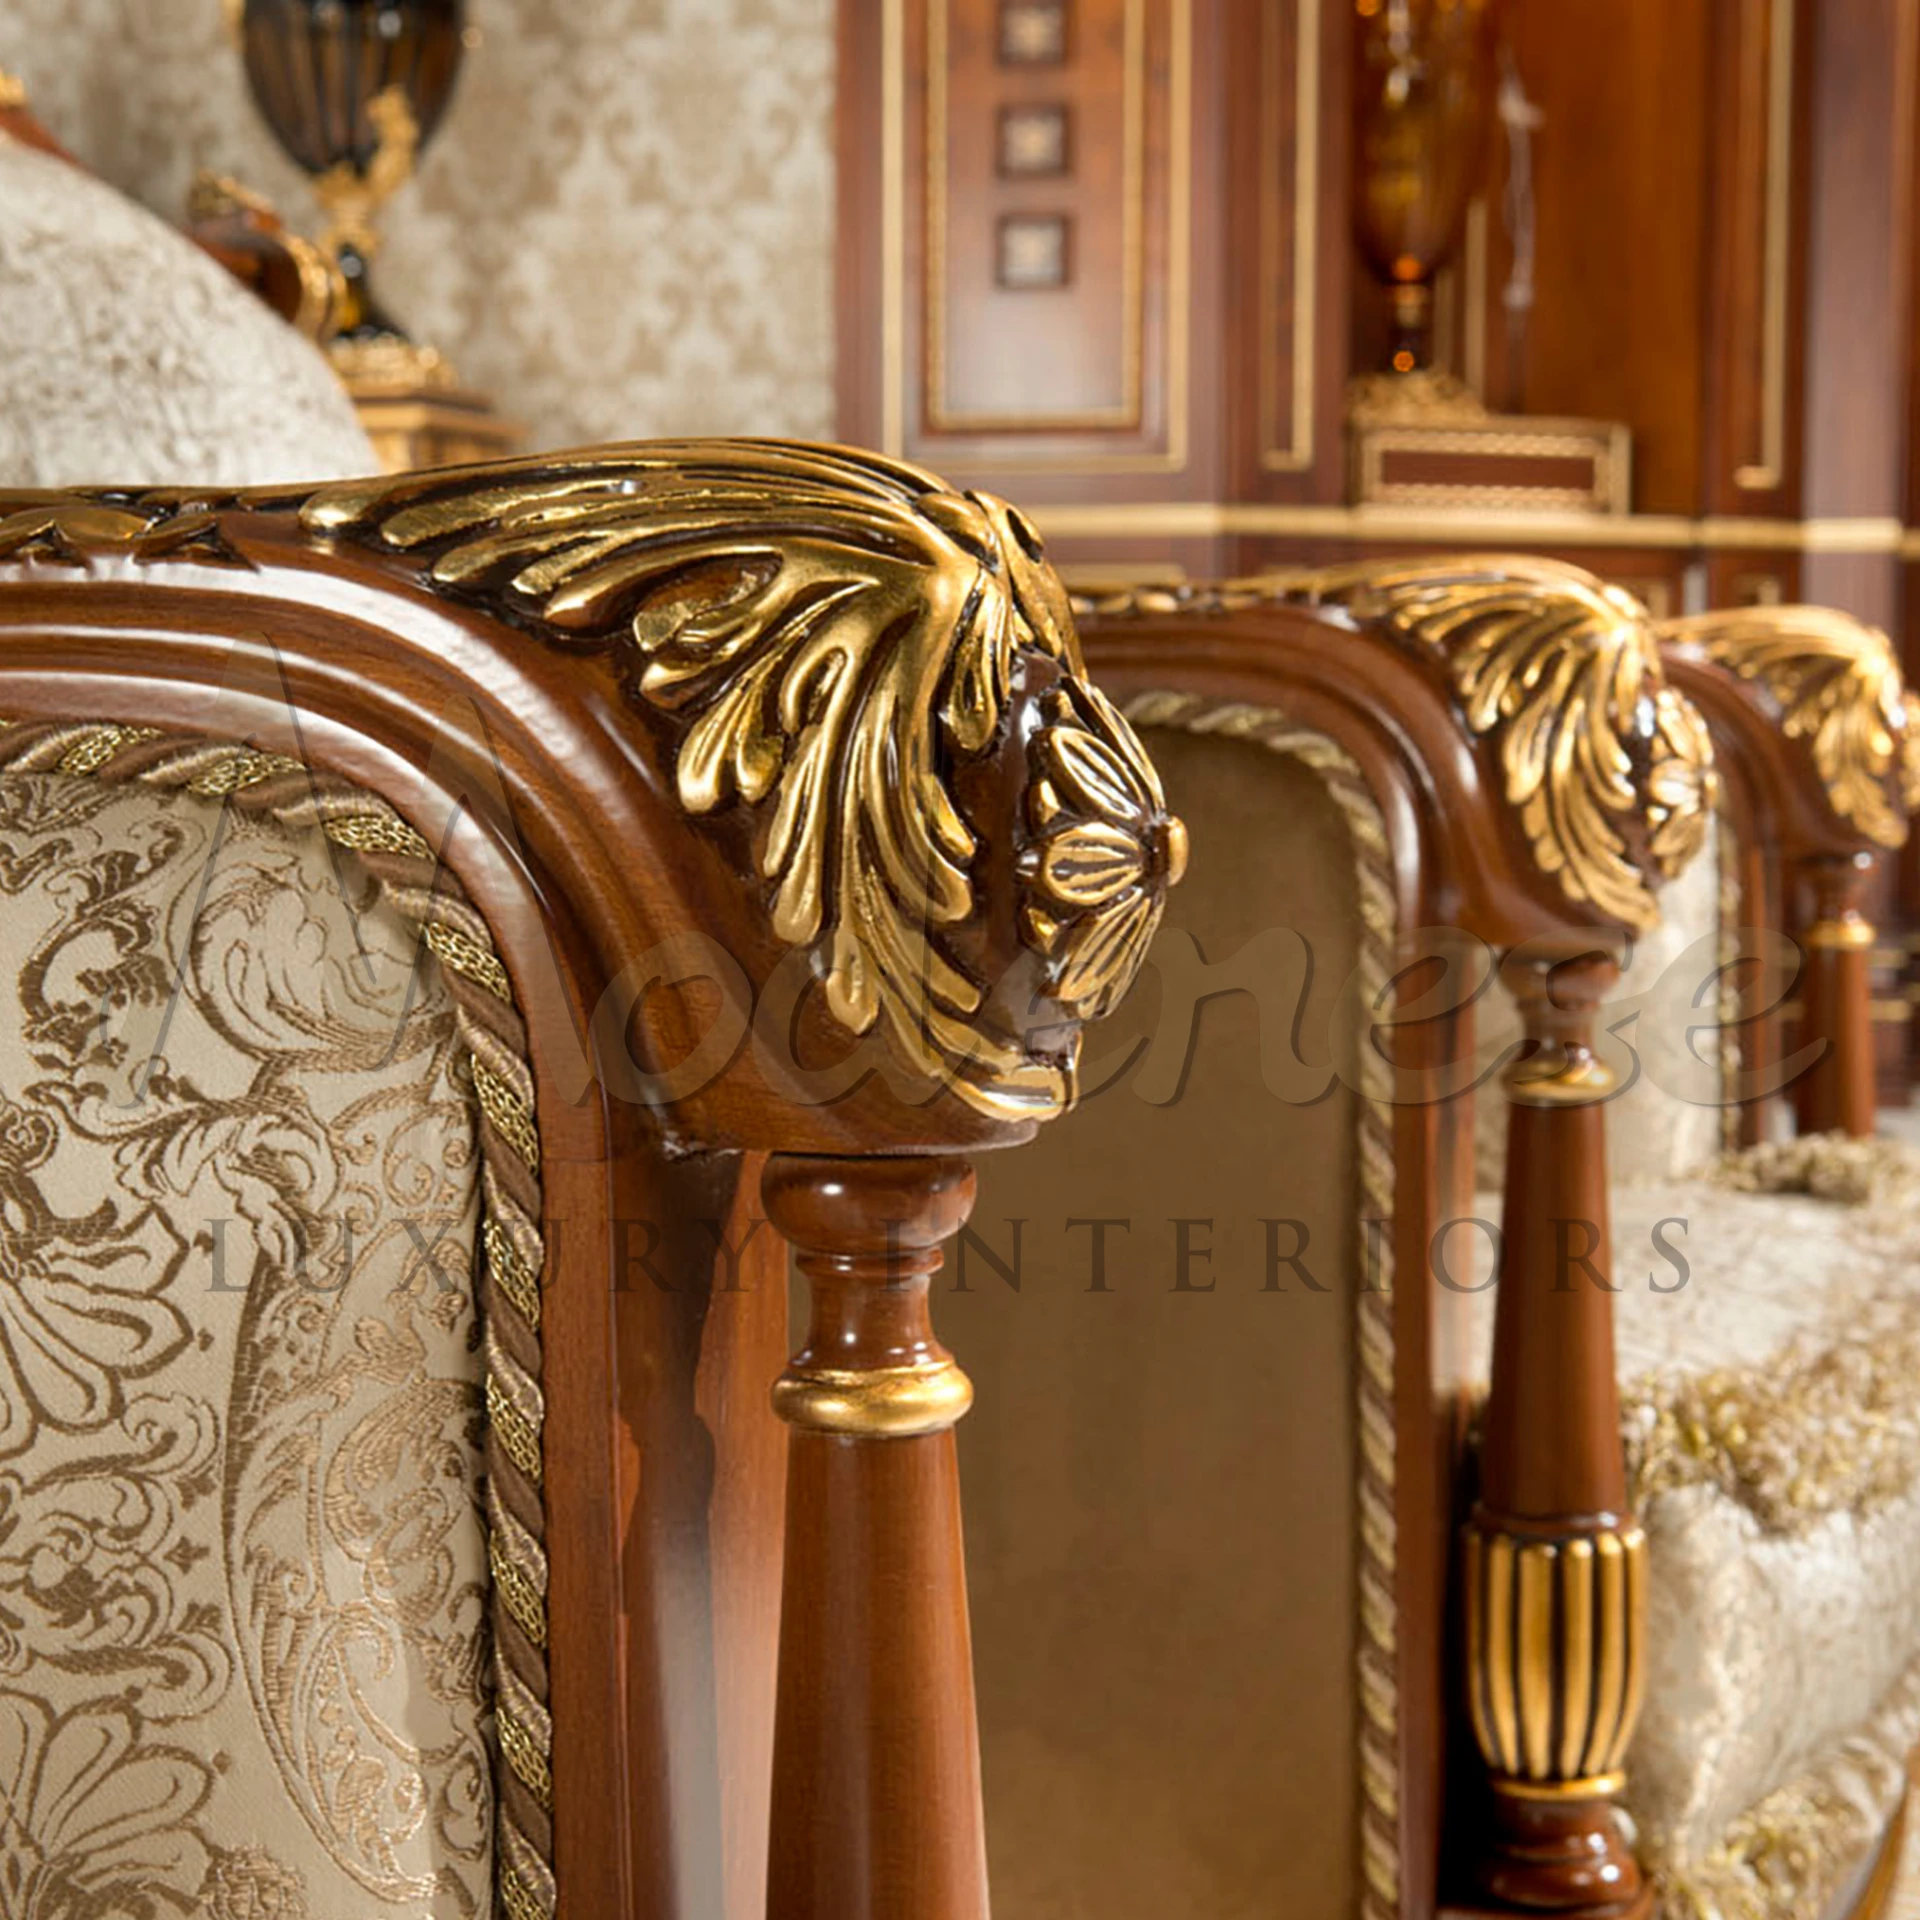 Luxurious small sofa with rich golden beige fabric and intricate woodwork, encapsulating a neoclassical aesthetic.